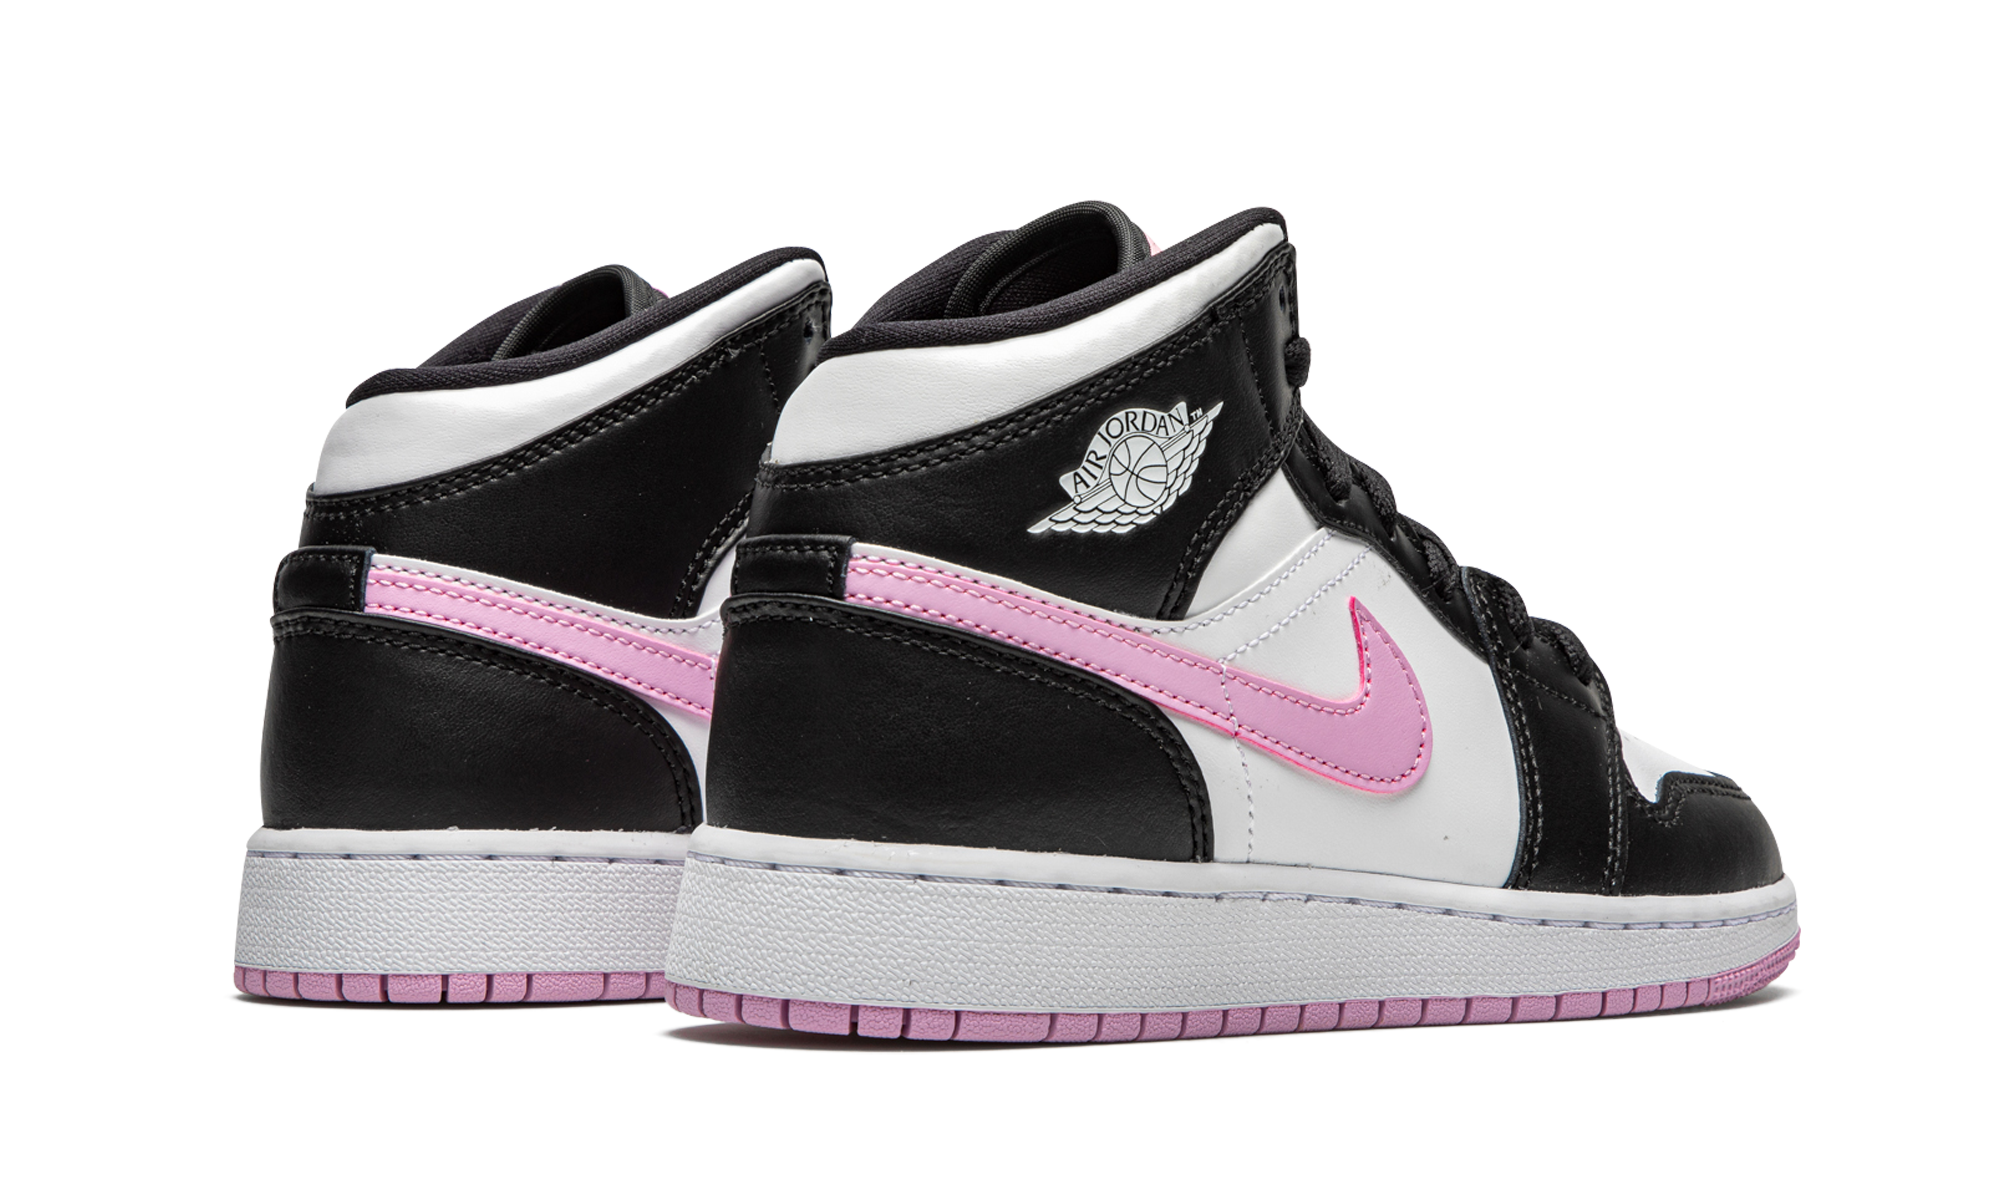 Double Boxed  274.99 Nike Air Jordan 1 Mid Arctic Pink Double Boxed